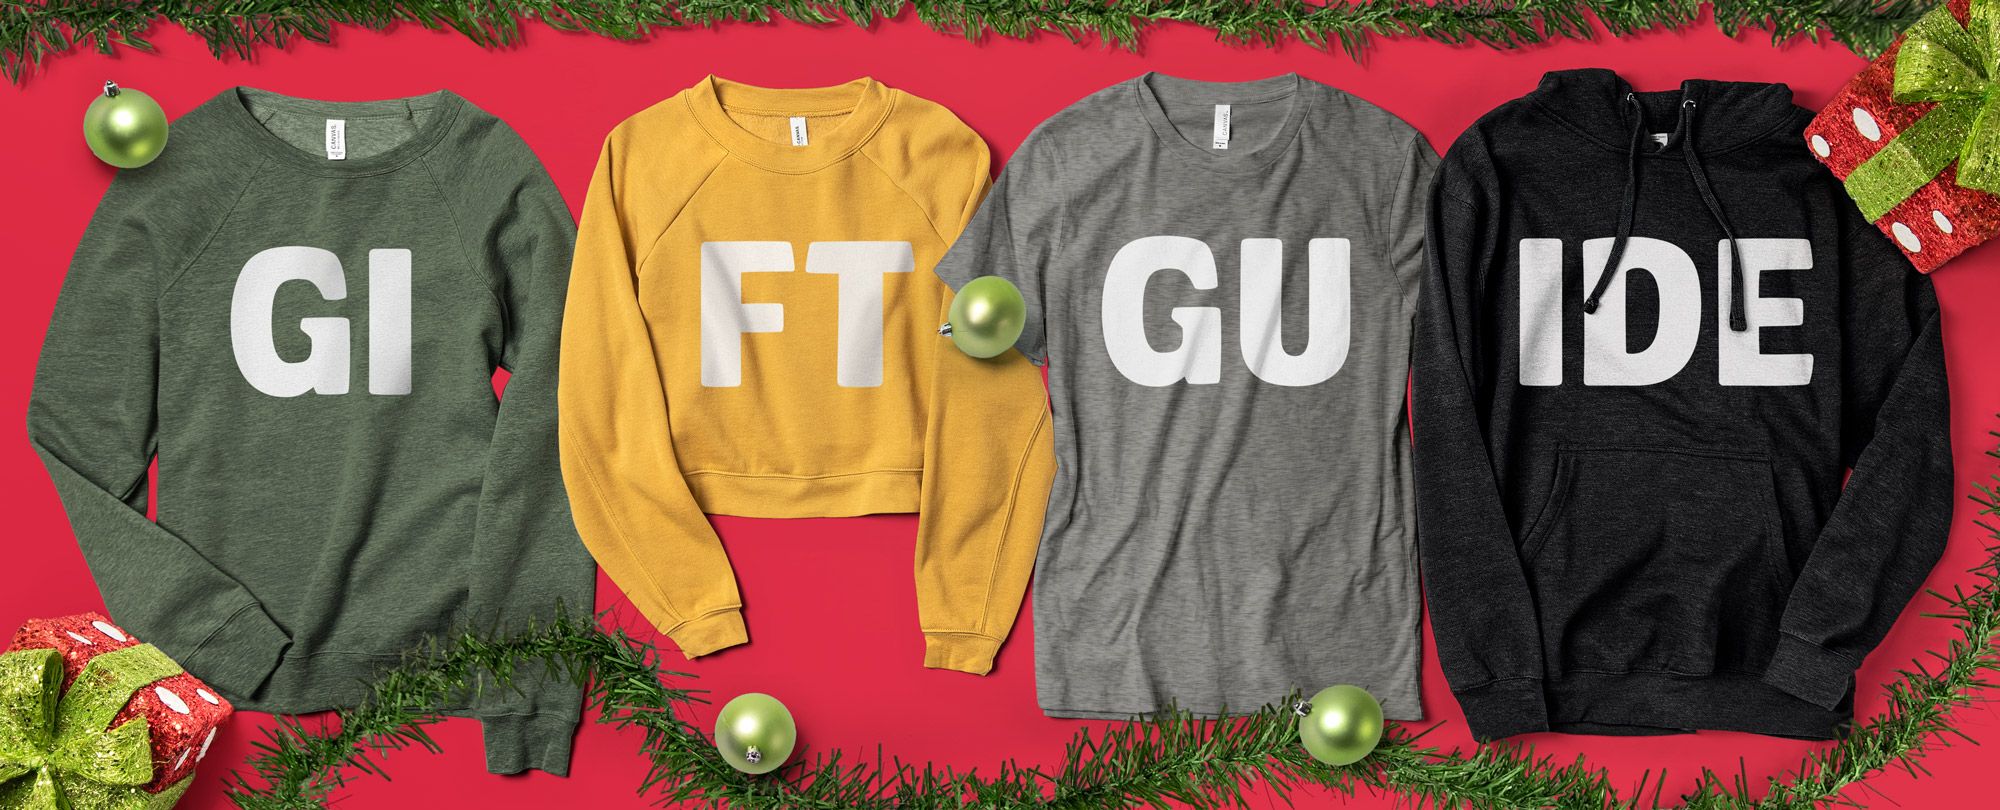 Make it Personal: Custom Apparel for the Holidays | Gift Guide